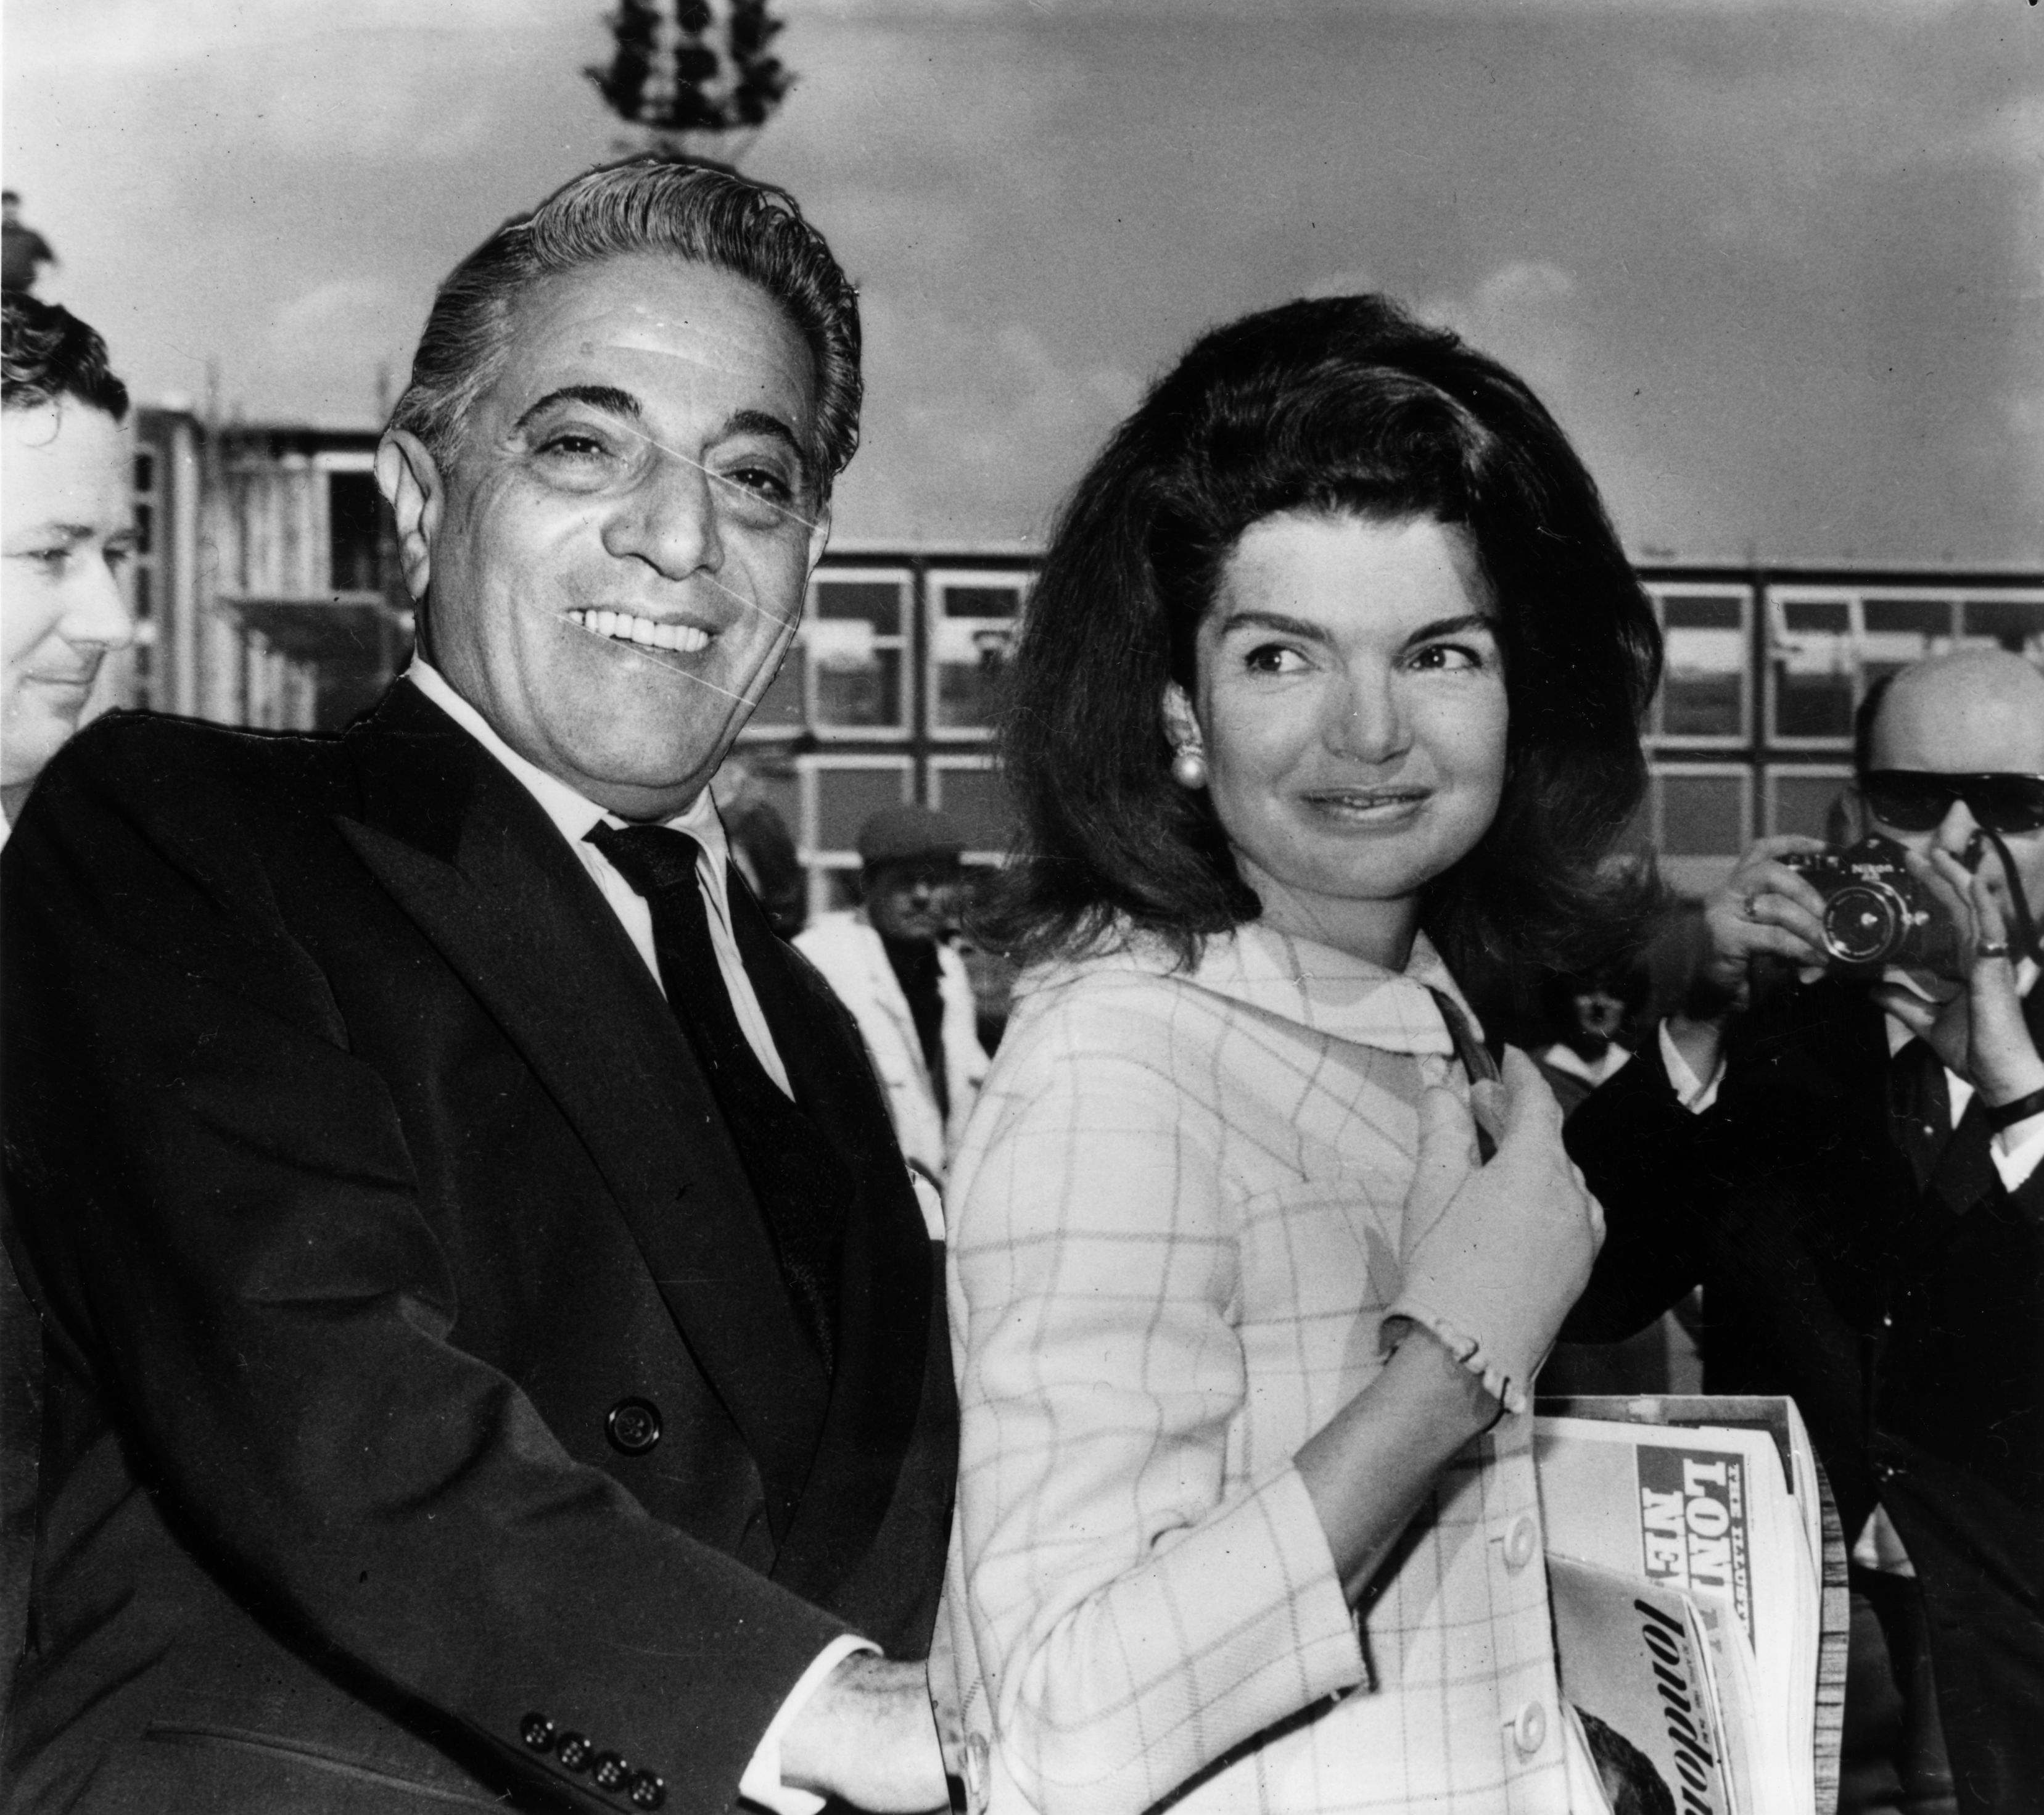 Millionaire shipping magnate Aristotle Onassis and Jackie Kennedy Onassis on October 18, 1968. | Source: Getty Images.